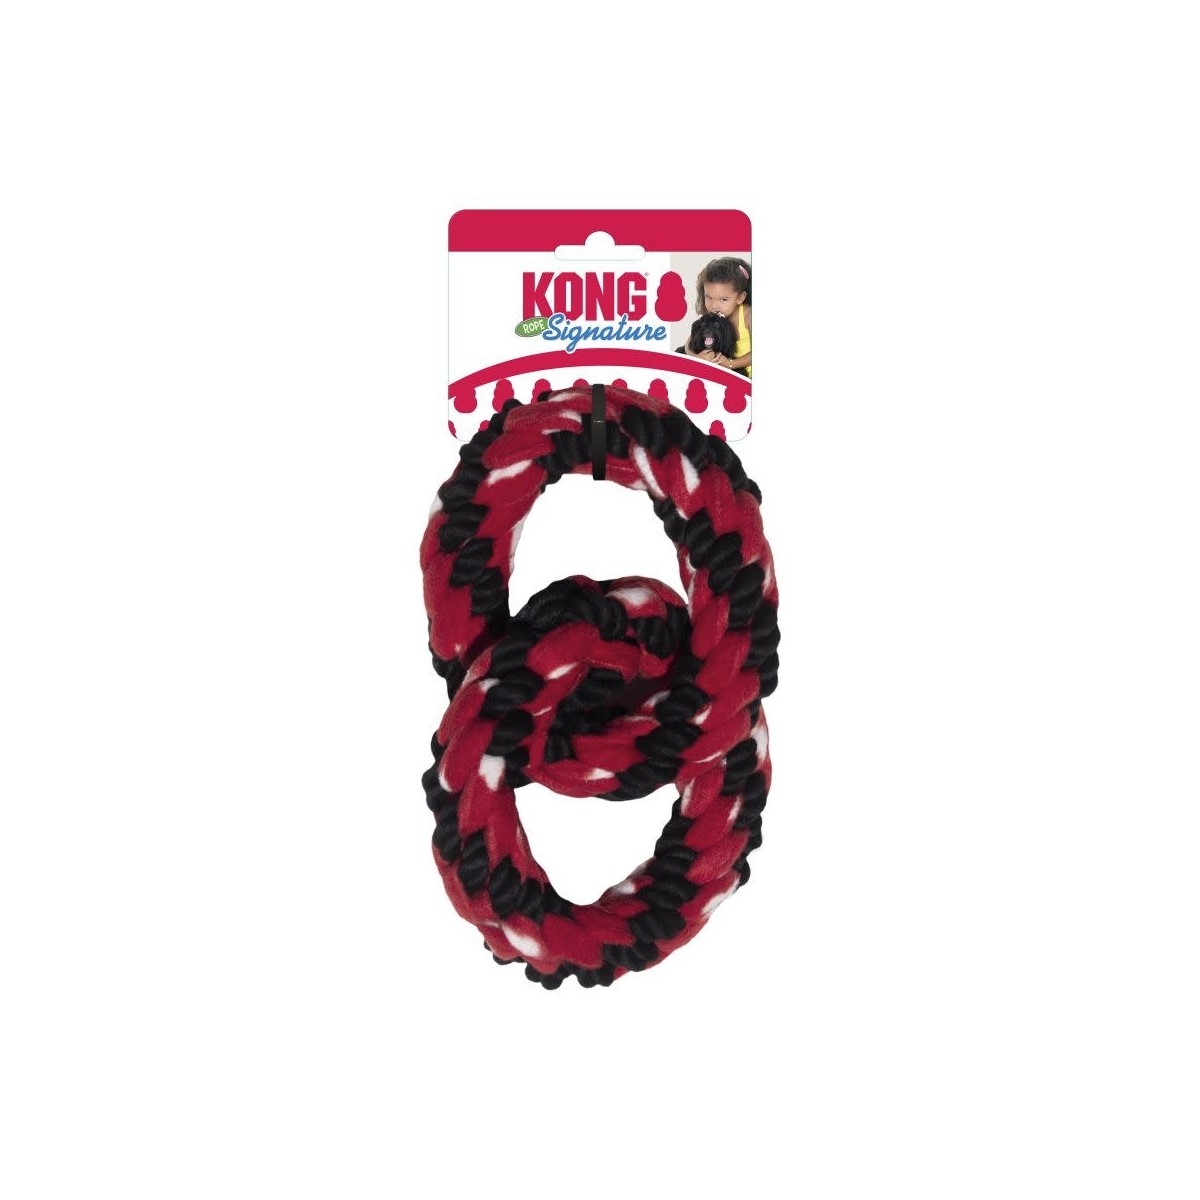 KONG Signature Rope Double Ring Tug für Hunde